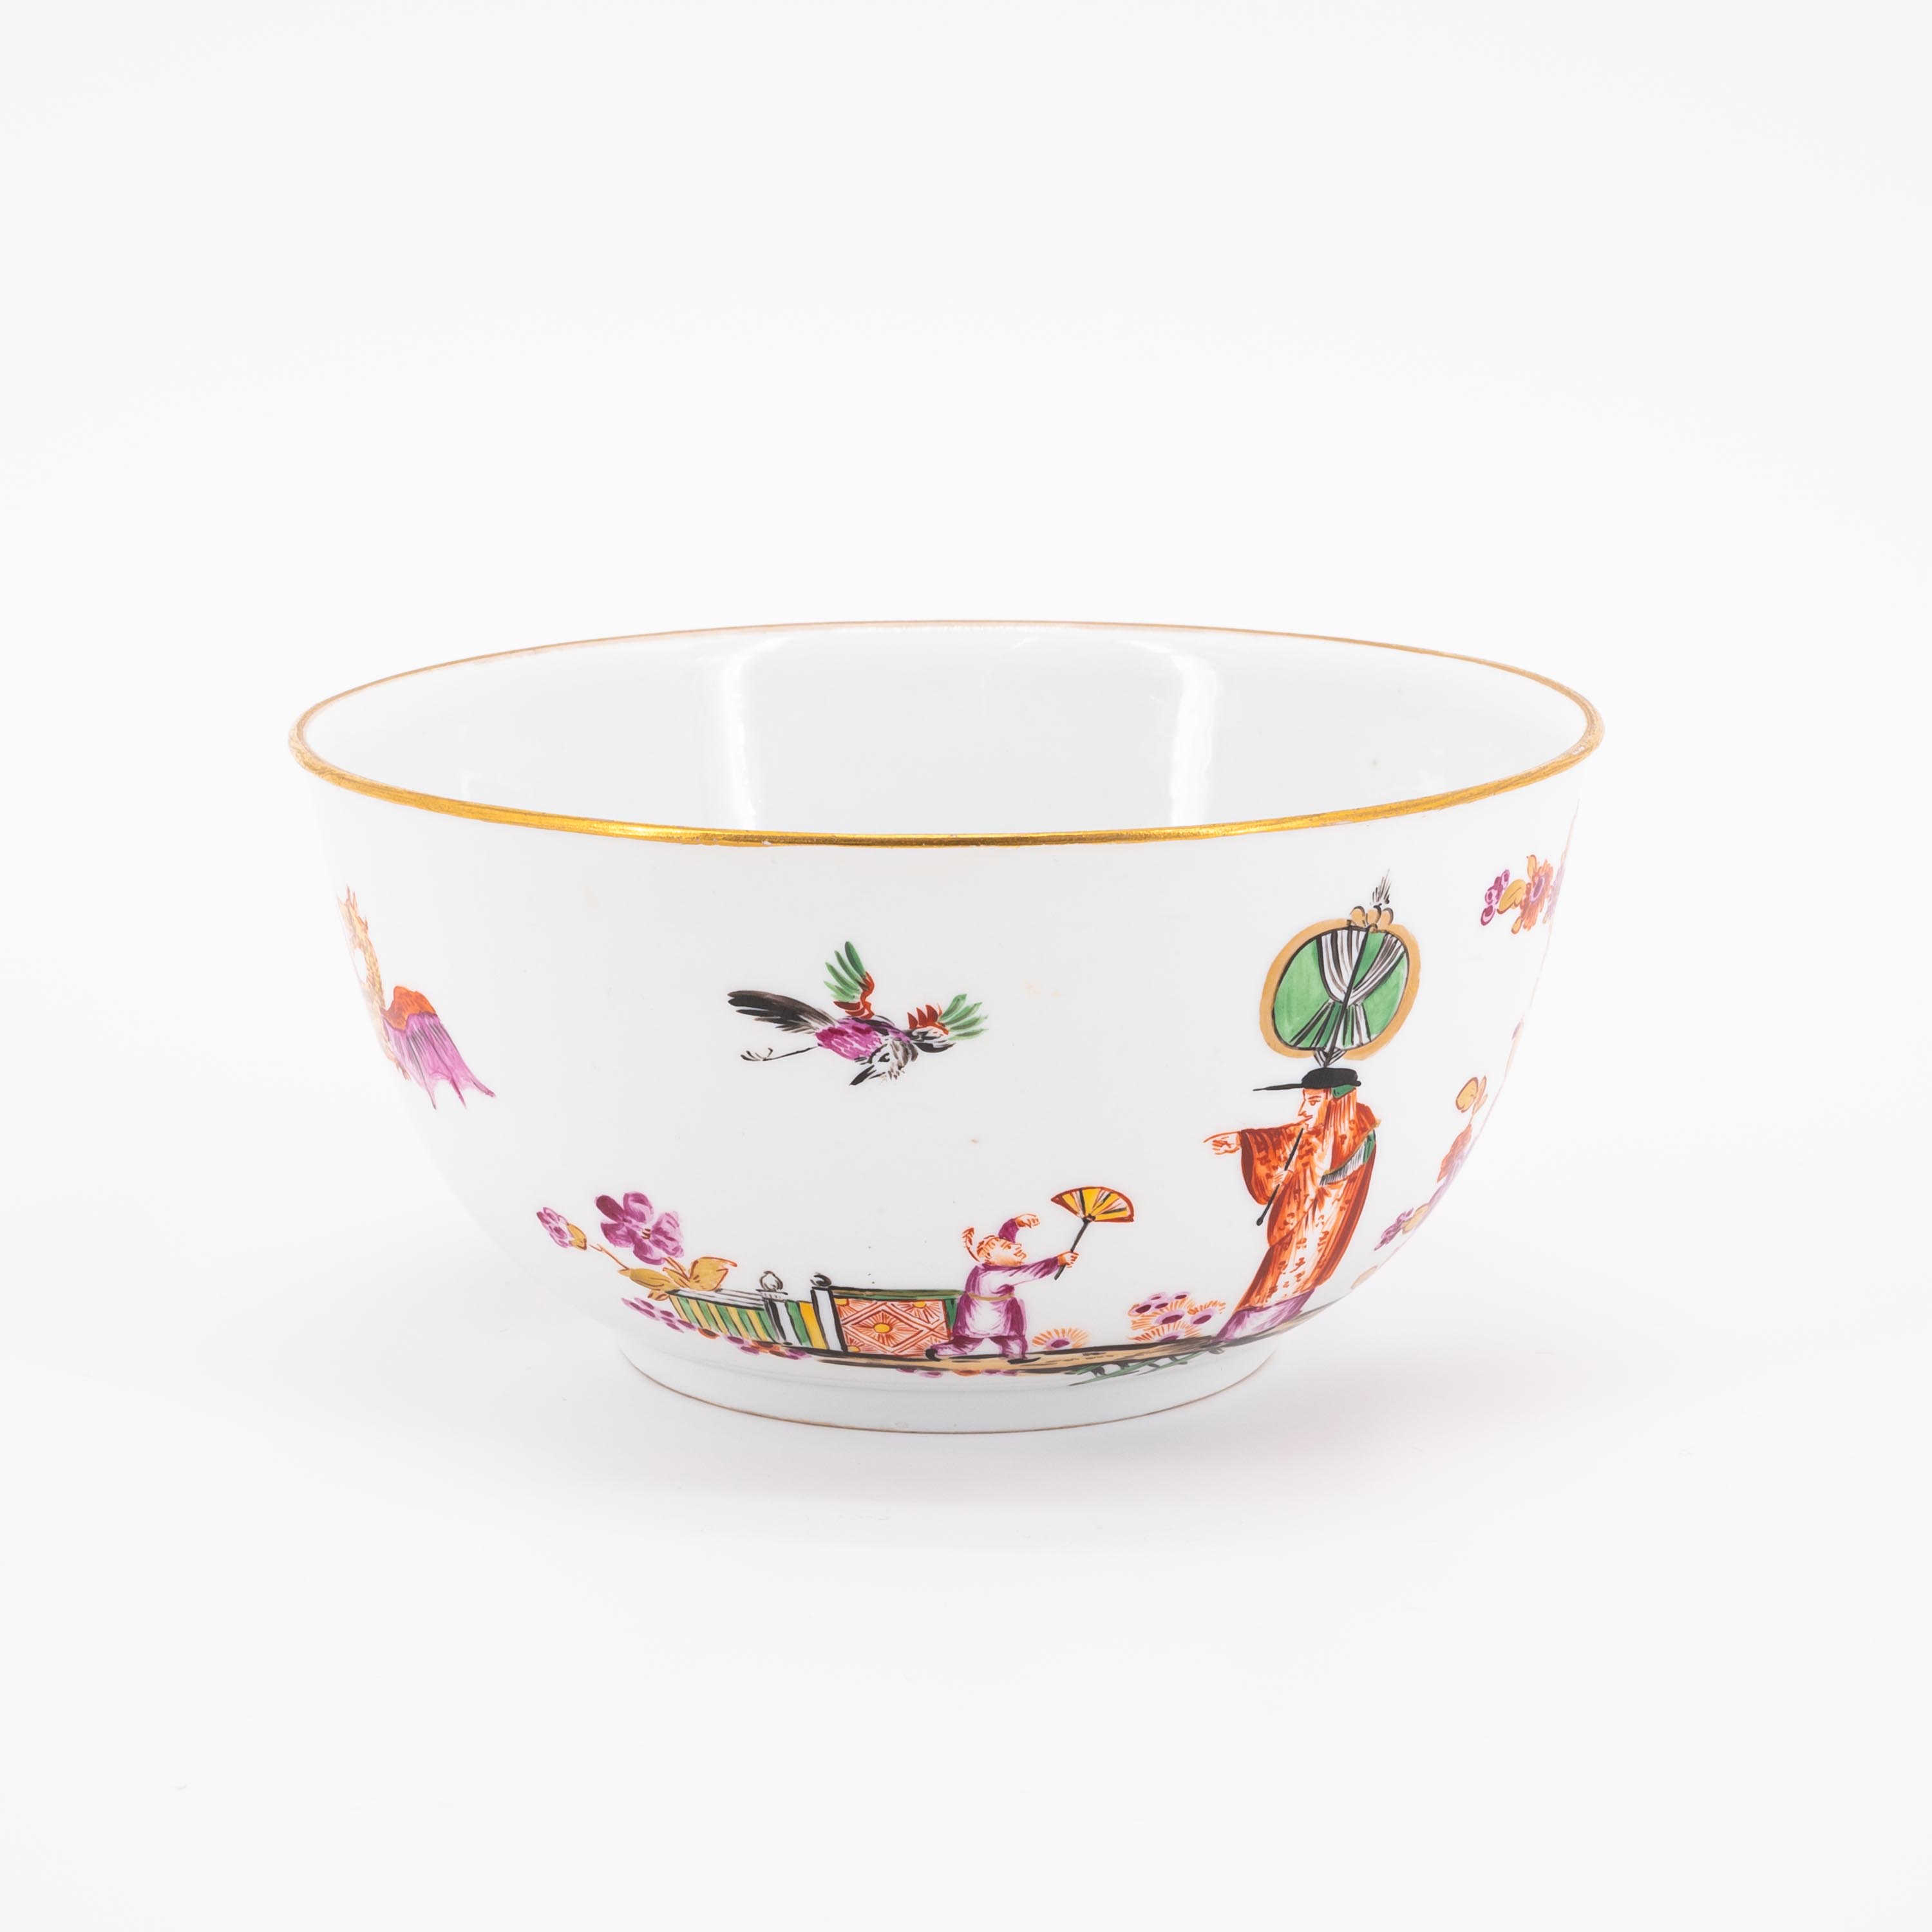 PORCELAIN SLOP BOWL WITH LATER CHINOSERIE DECOR - Image 4 of 7